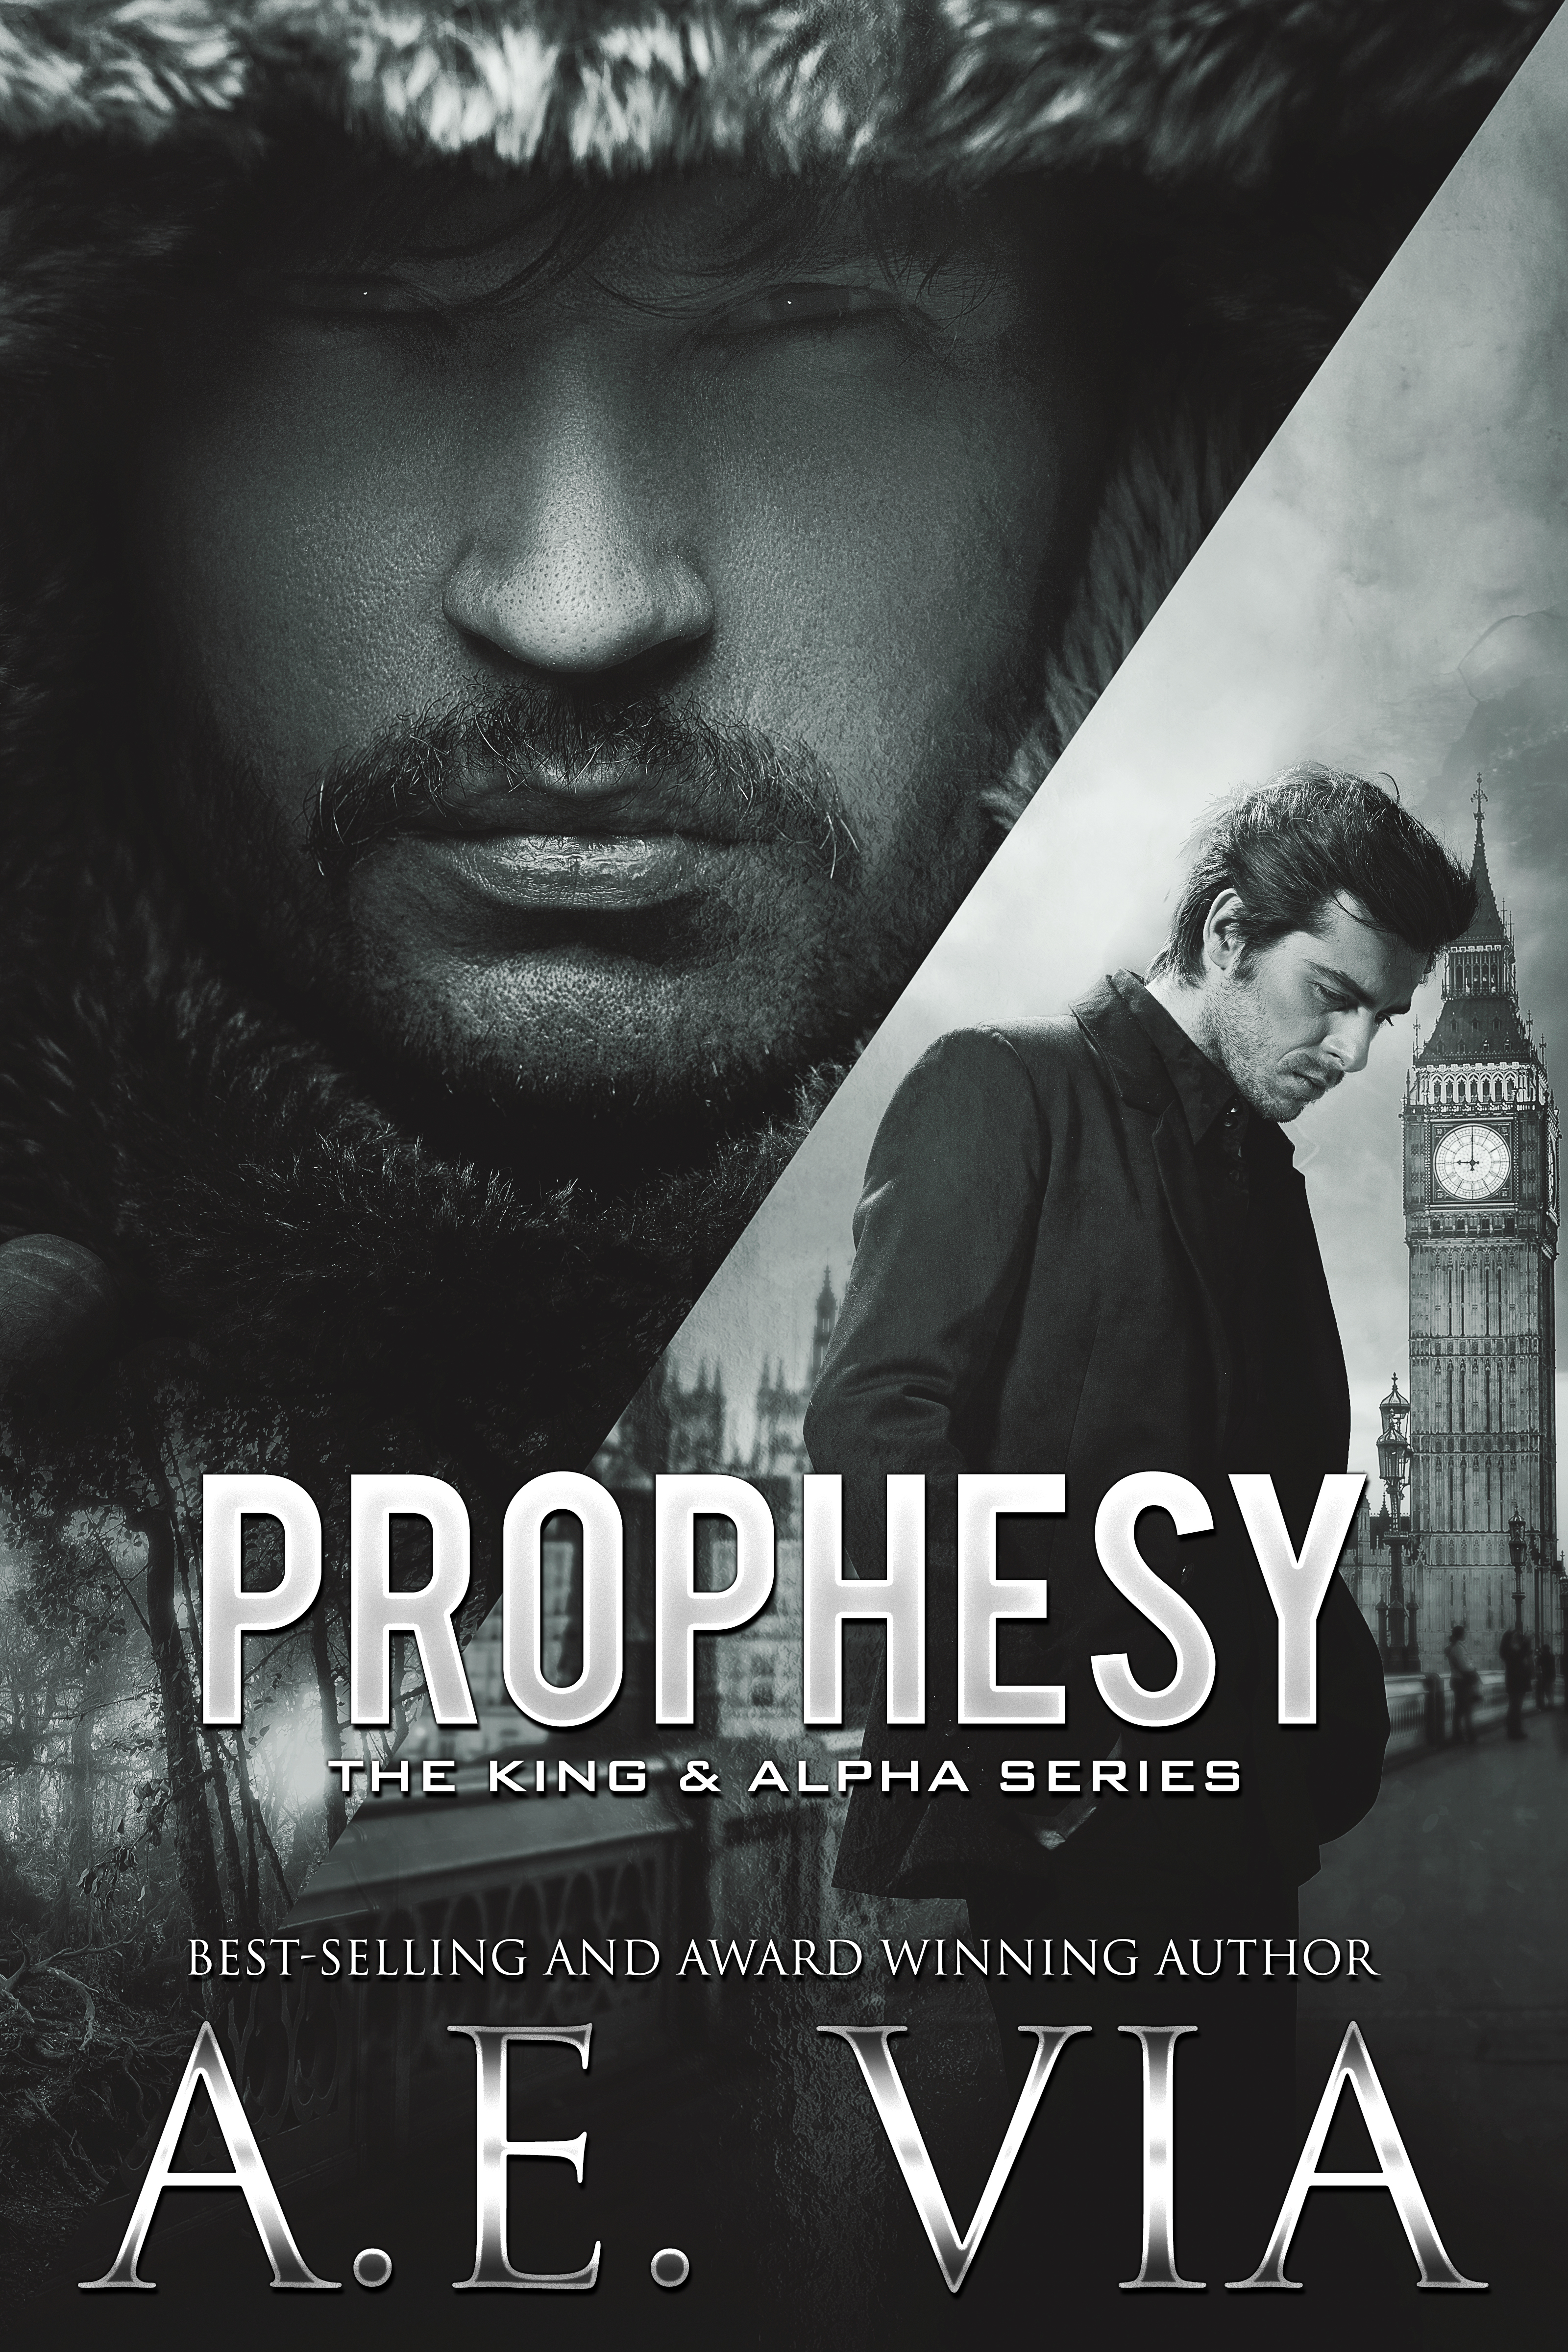 Prophesy: The King & Alpha Series